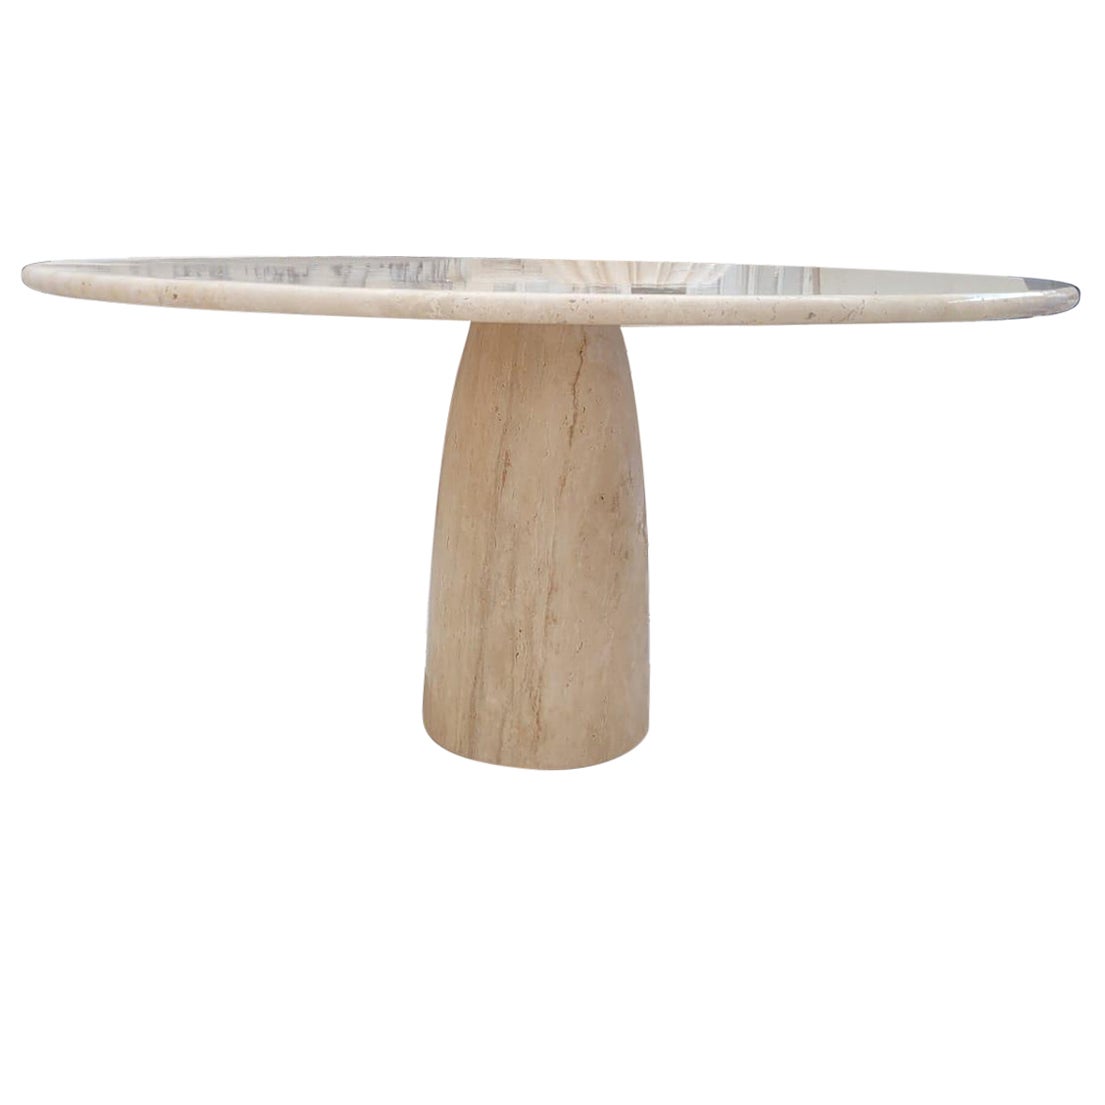 Cream Travertine Round Dining Table, in the Style of 1970 Angelo Mangiarotti